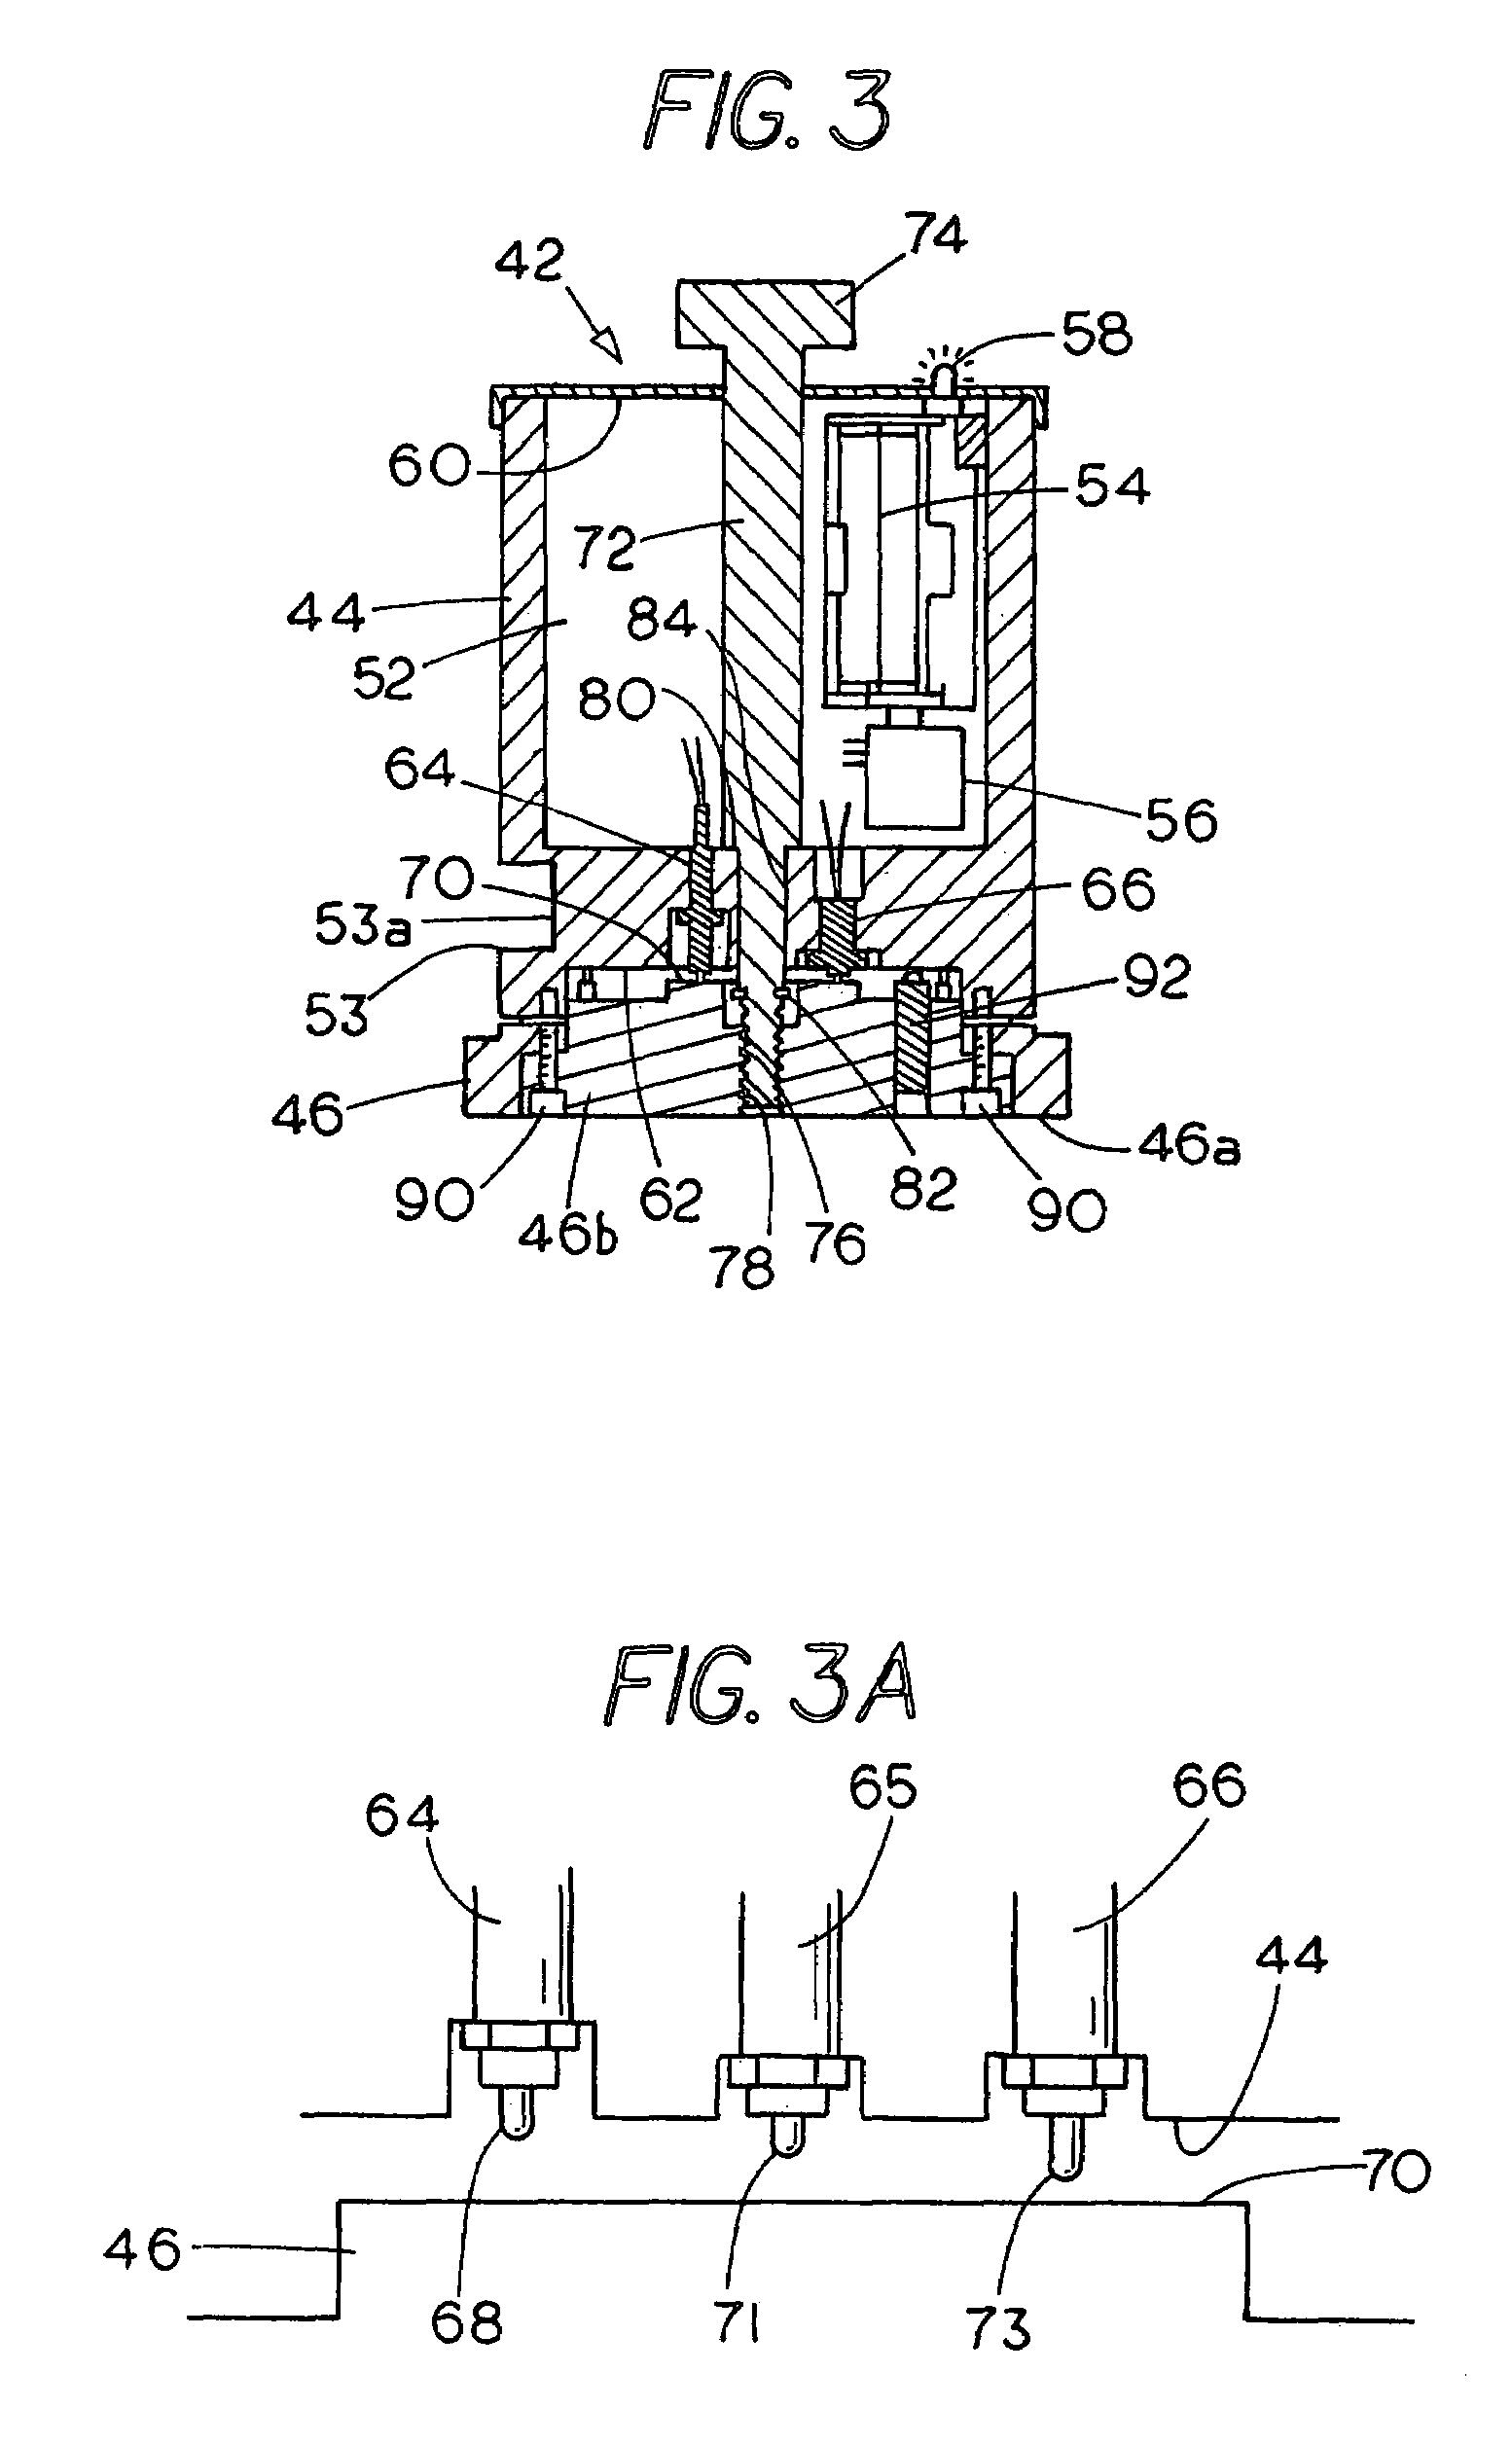 Punch press alignment instrument